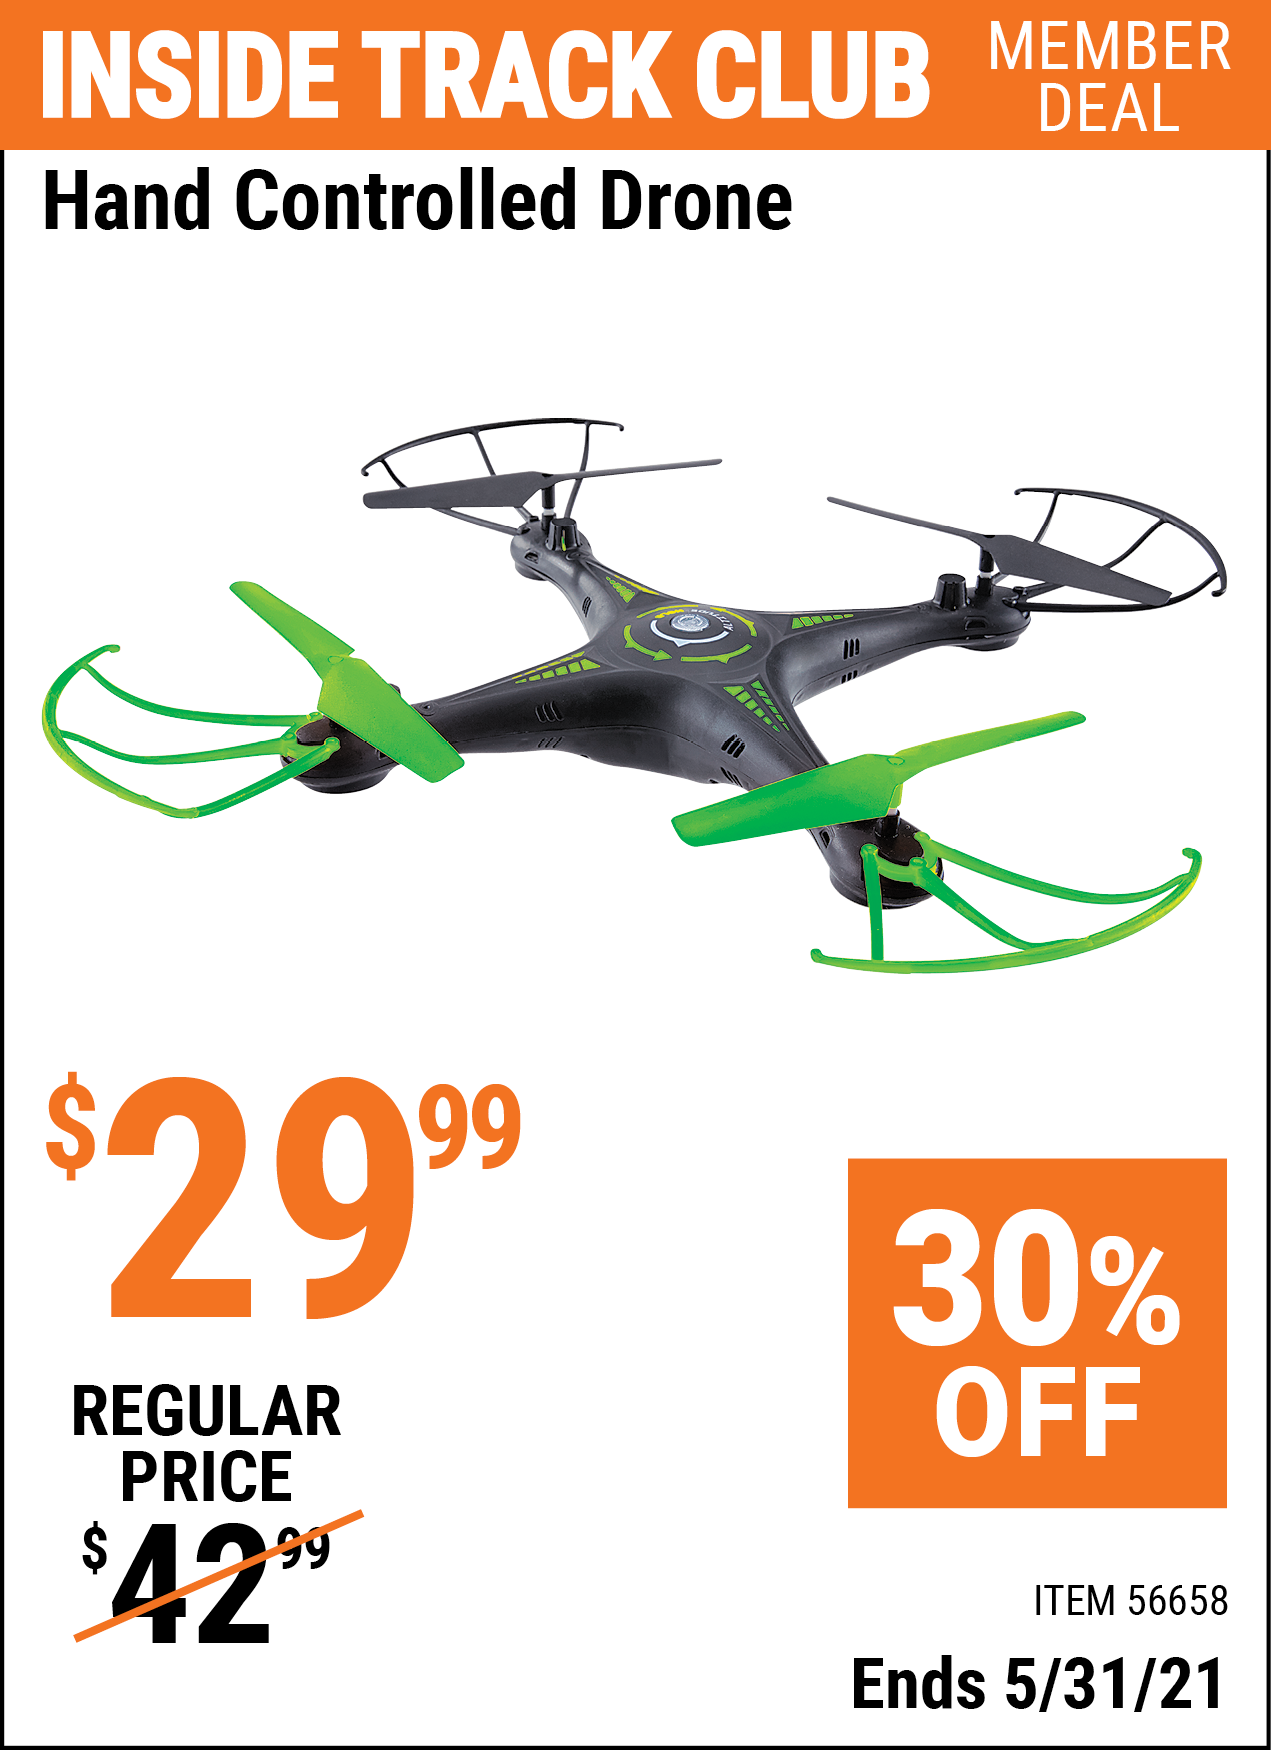 Inside Track Club members can buy the Hand Controlled Drone (Item 56658) for $29.99, valid through 5/31/2021.